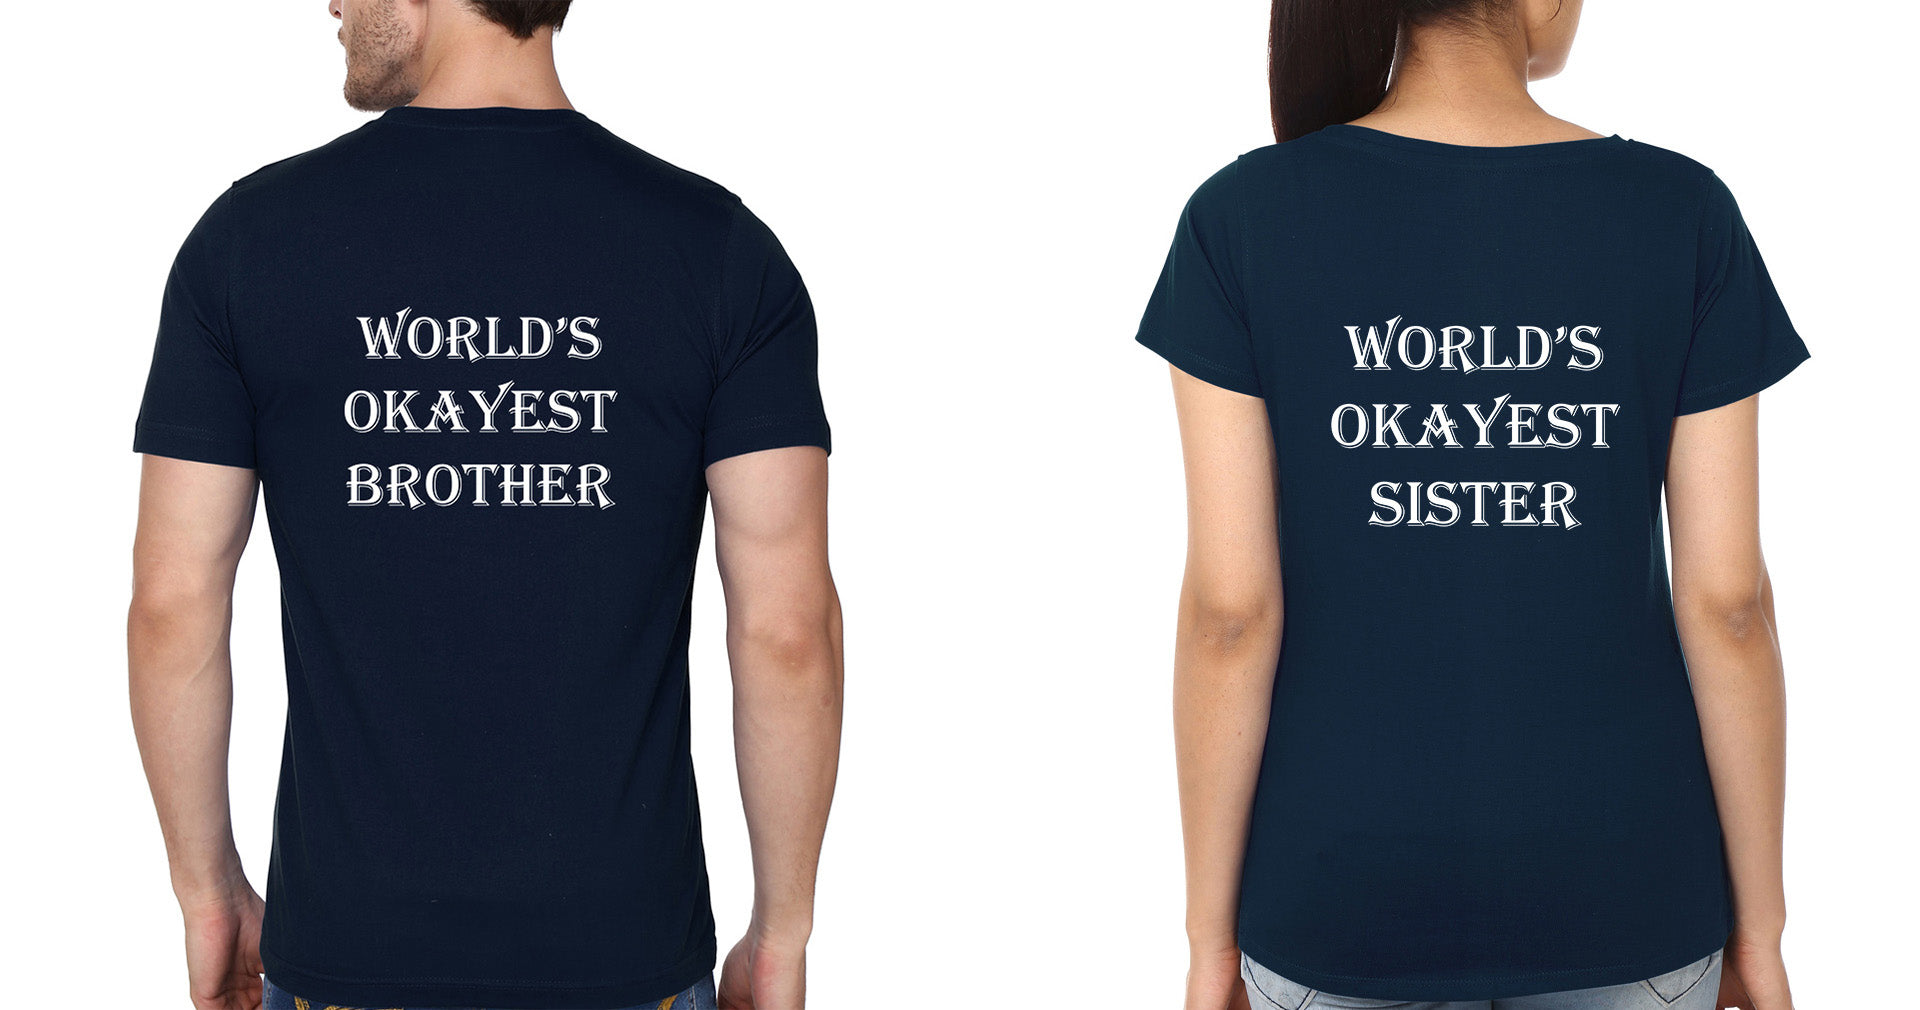 WORLD'S OKAYEST Brother and Sister Matching T-Shirts- FunkyTradition